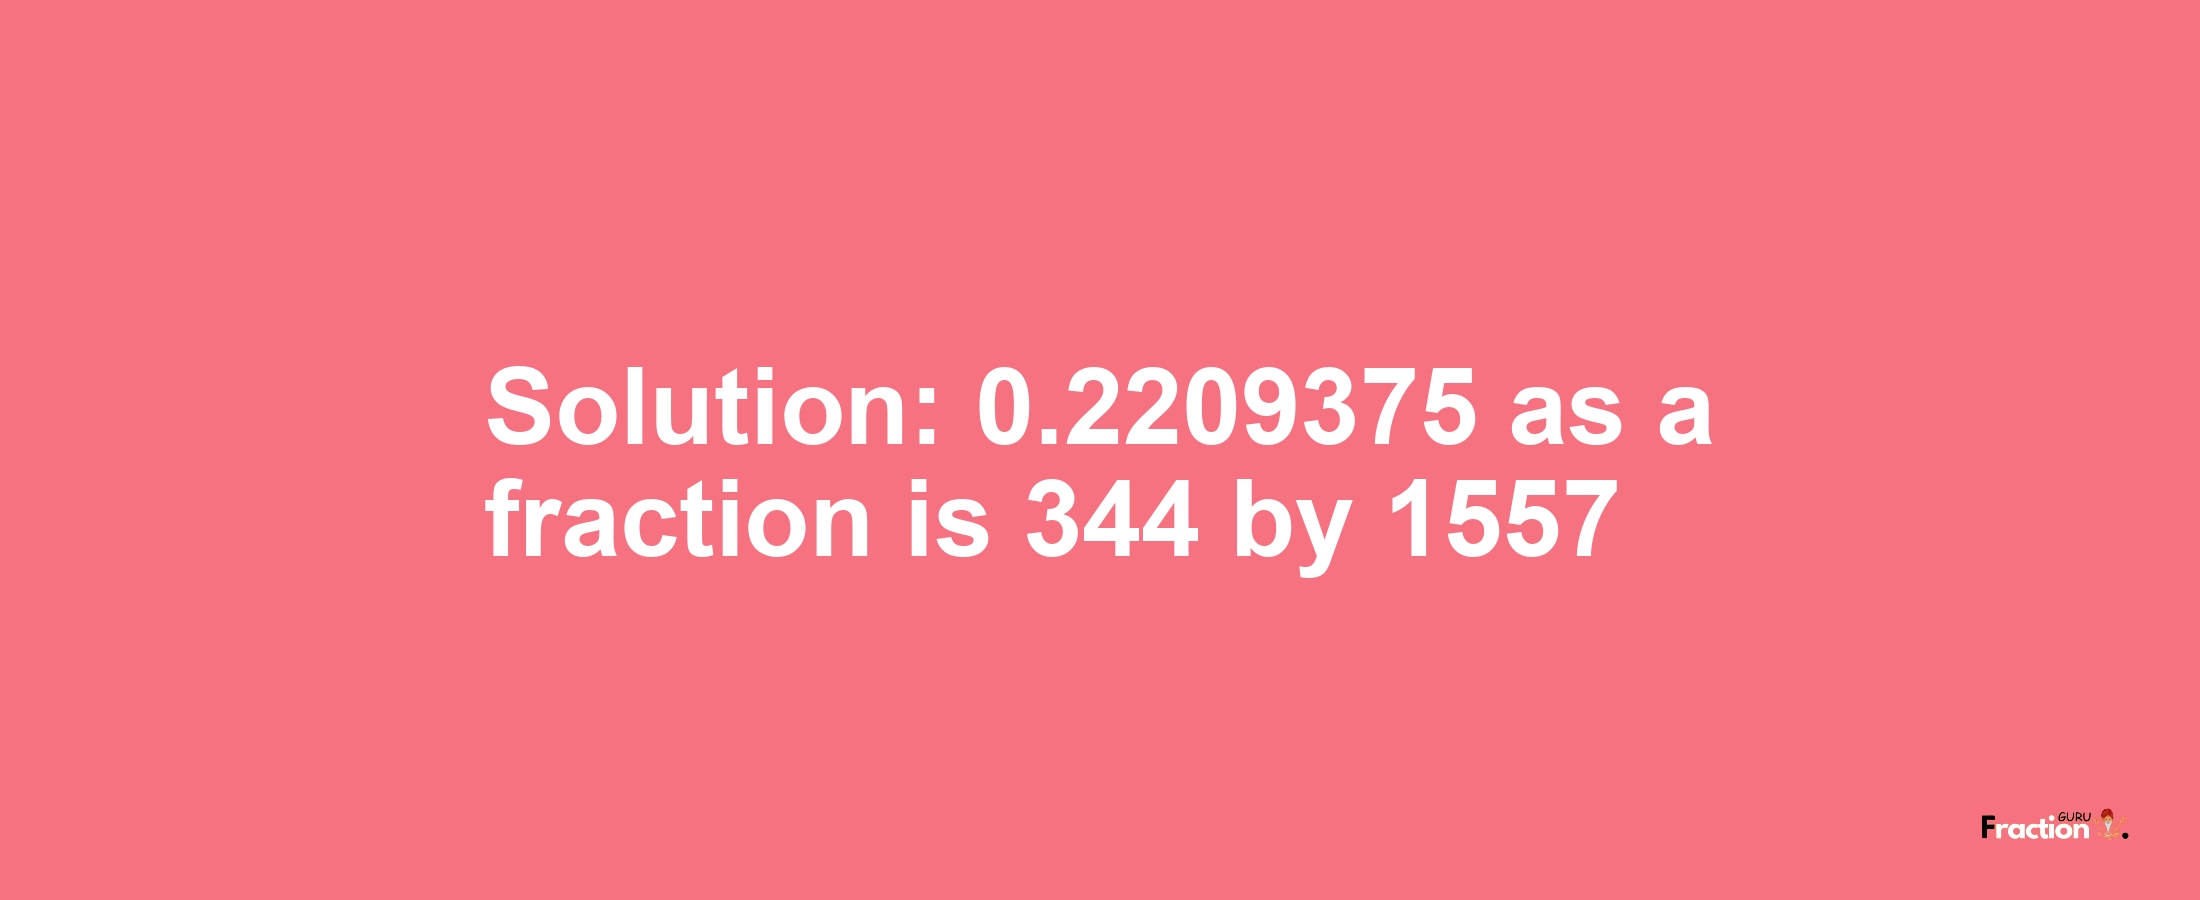 Solution:0.2209375 as a fraction is 344/1557